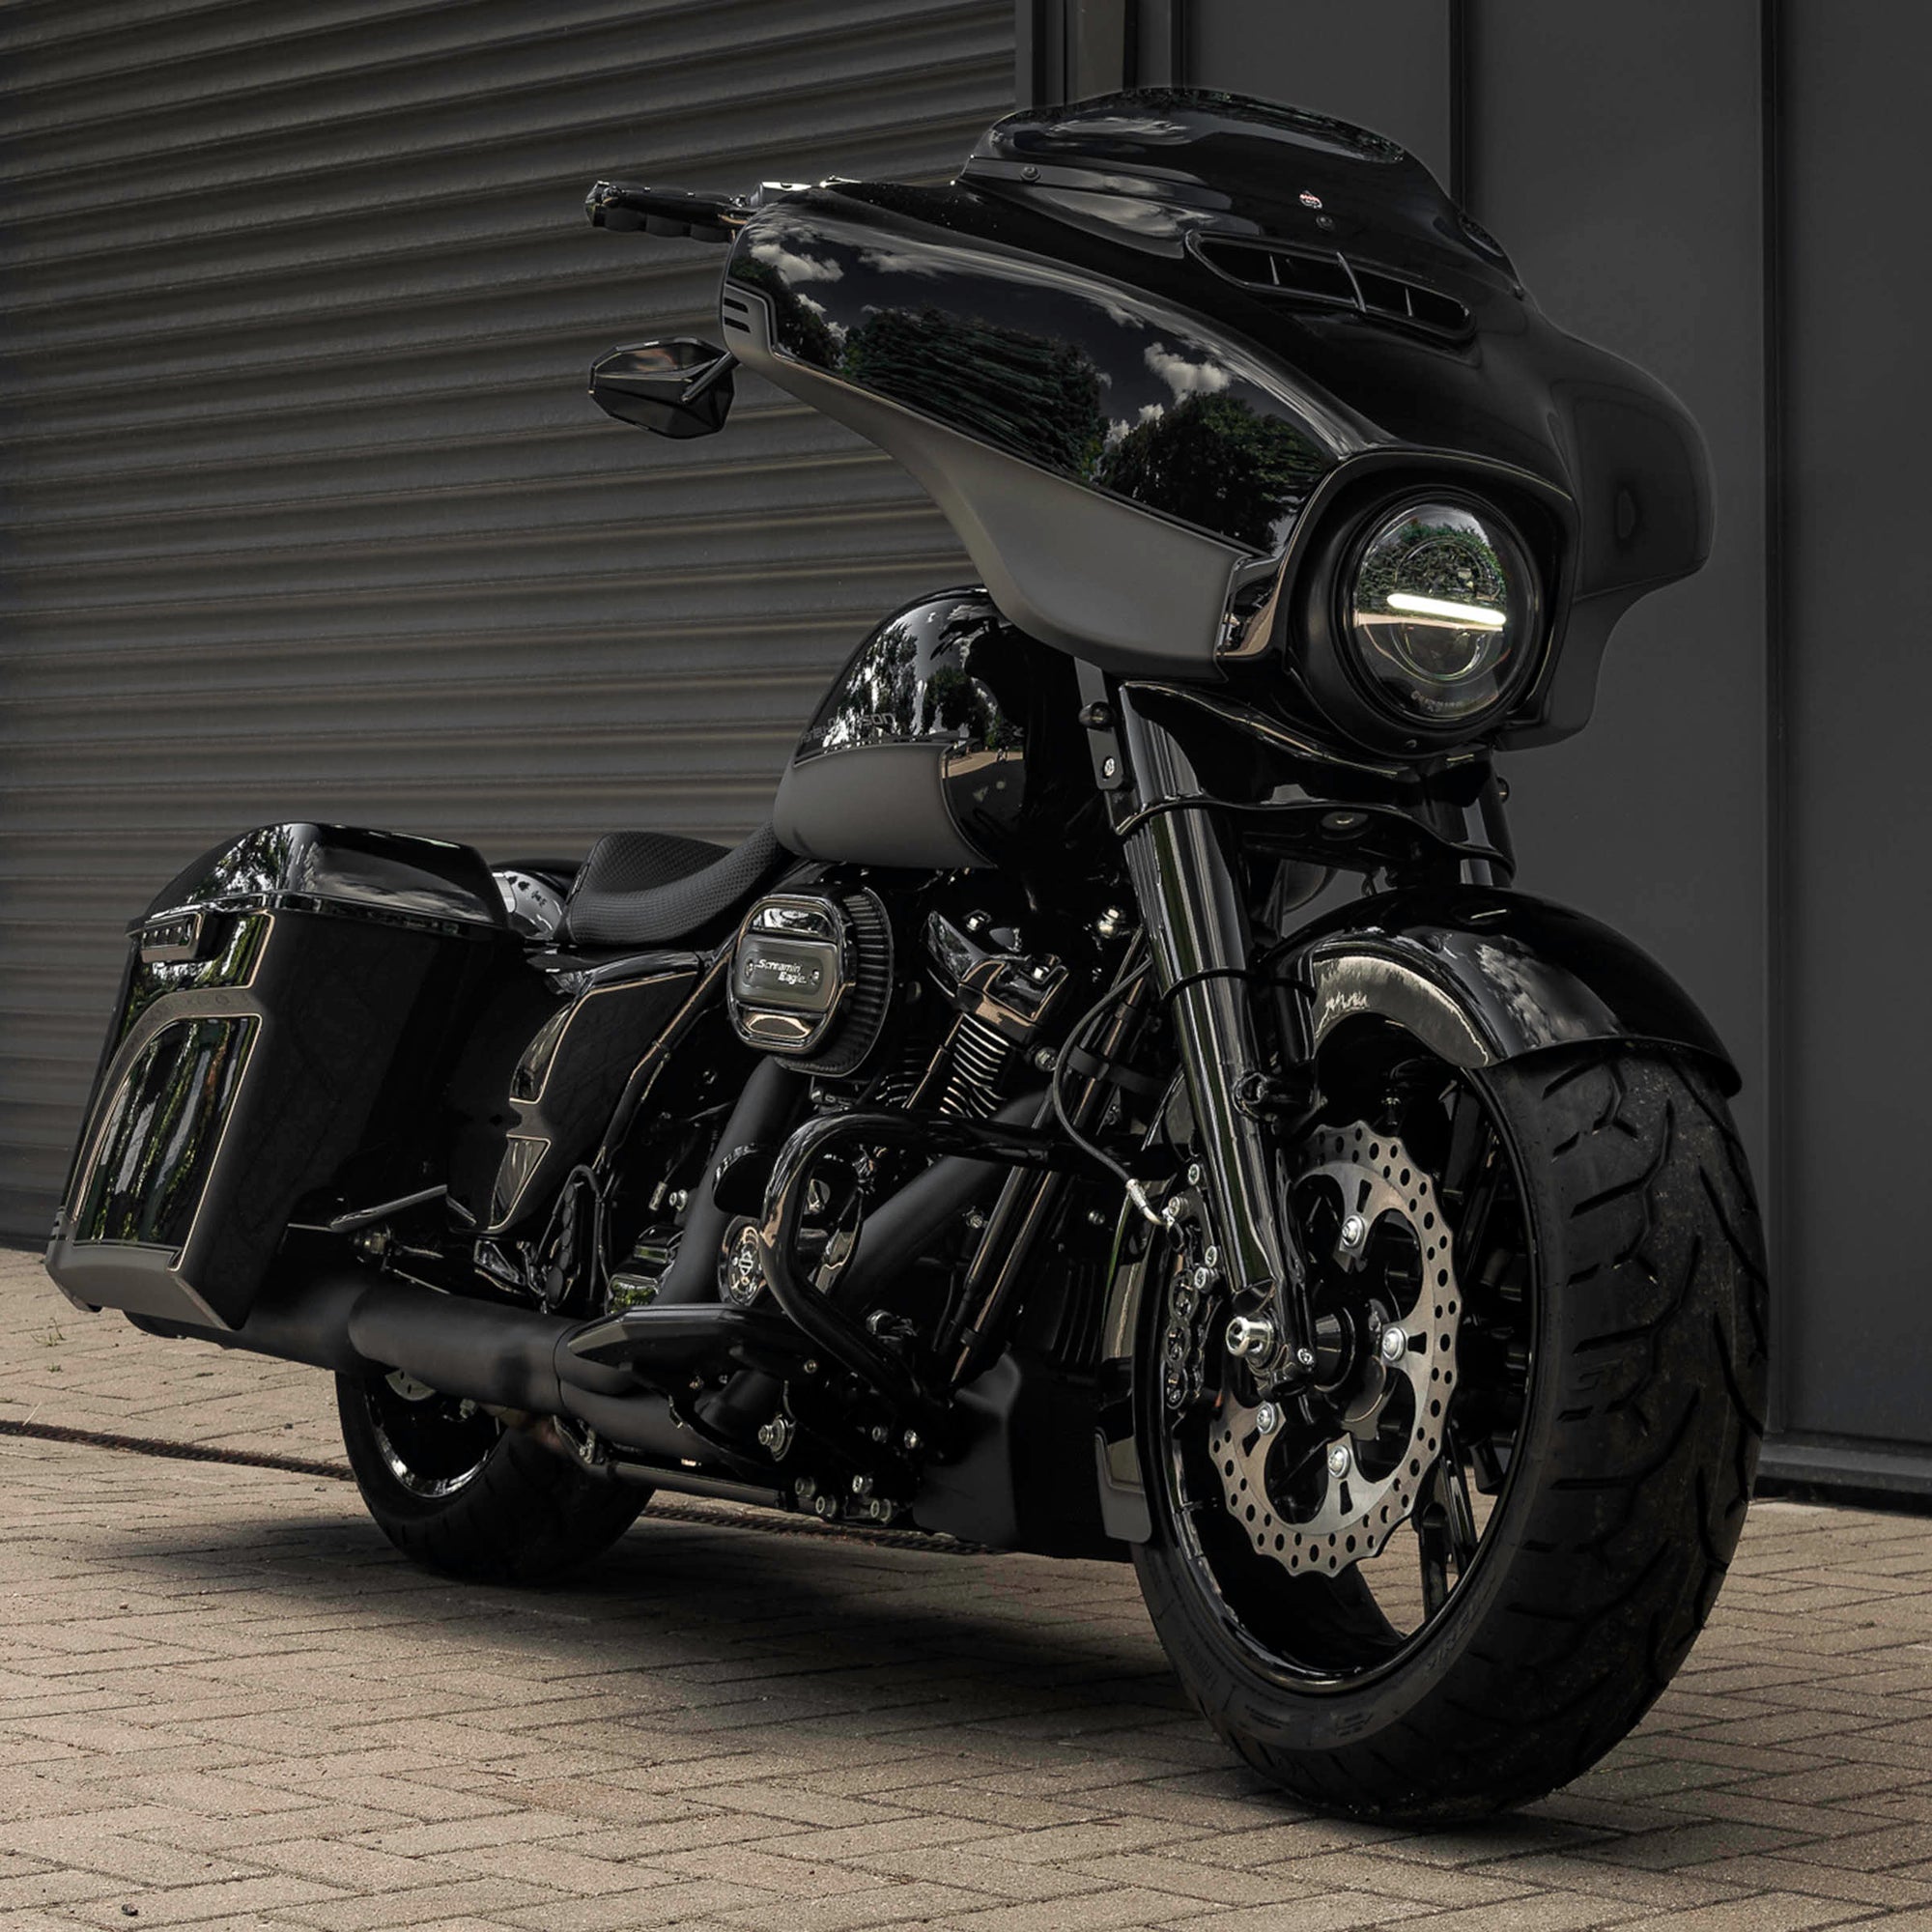 Modified Harley Davidson Street Glide motorcycle with Killer Custom parts from the front with a grey industrial wall in the background